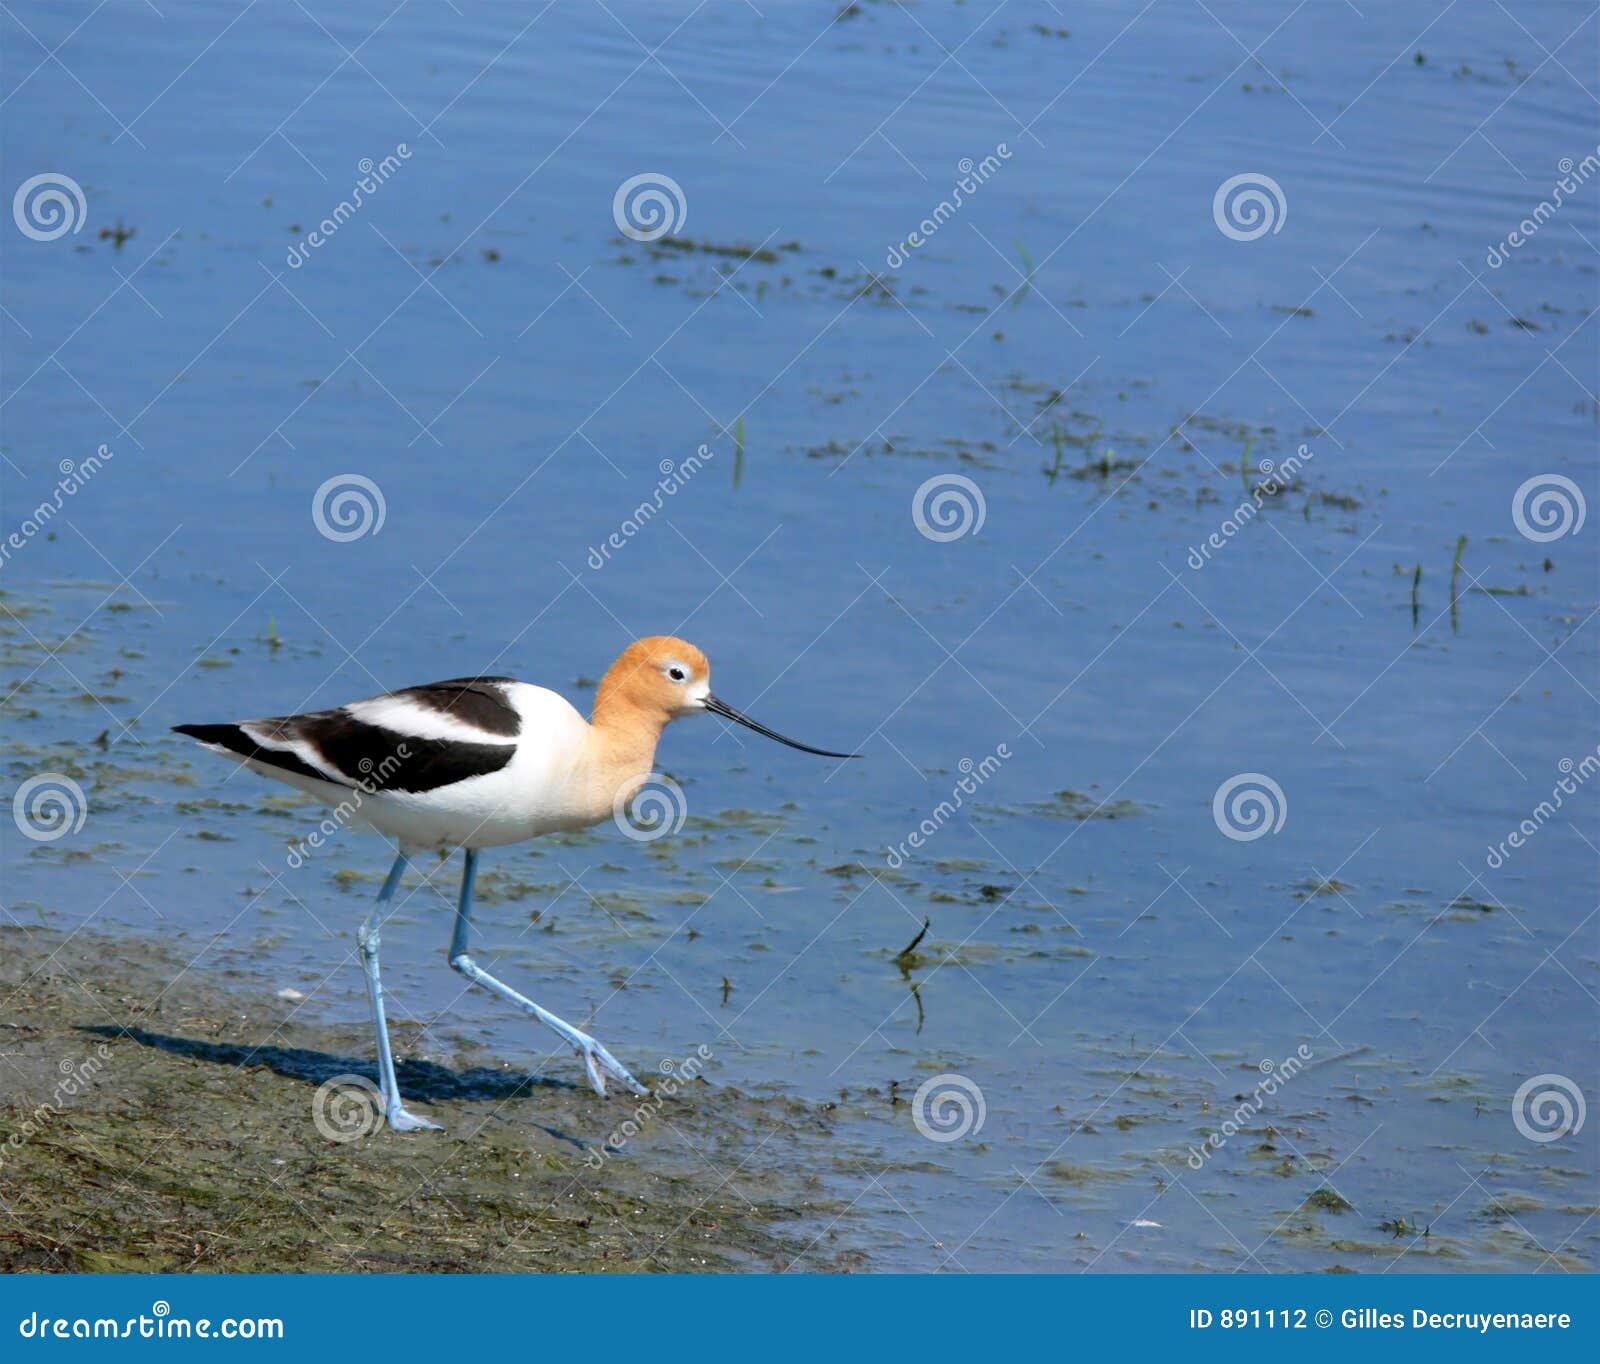 american avocet with room for text